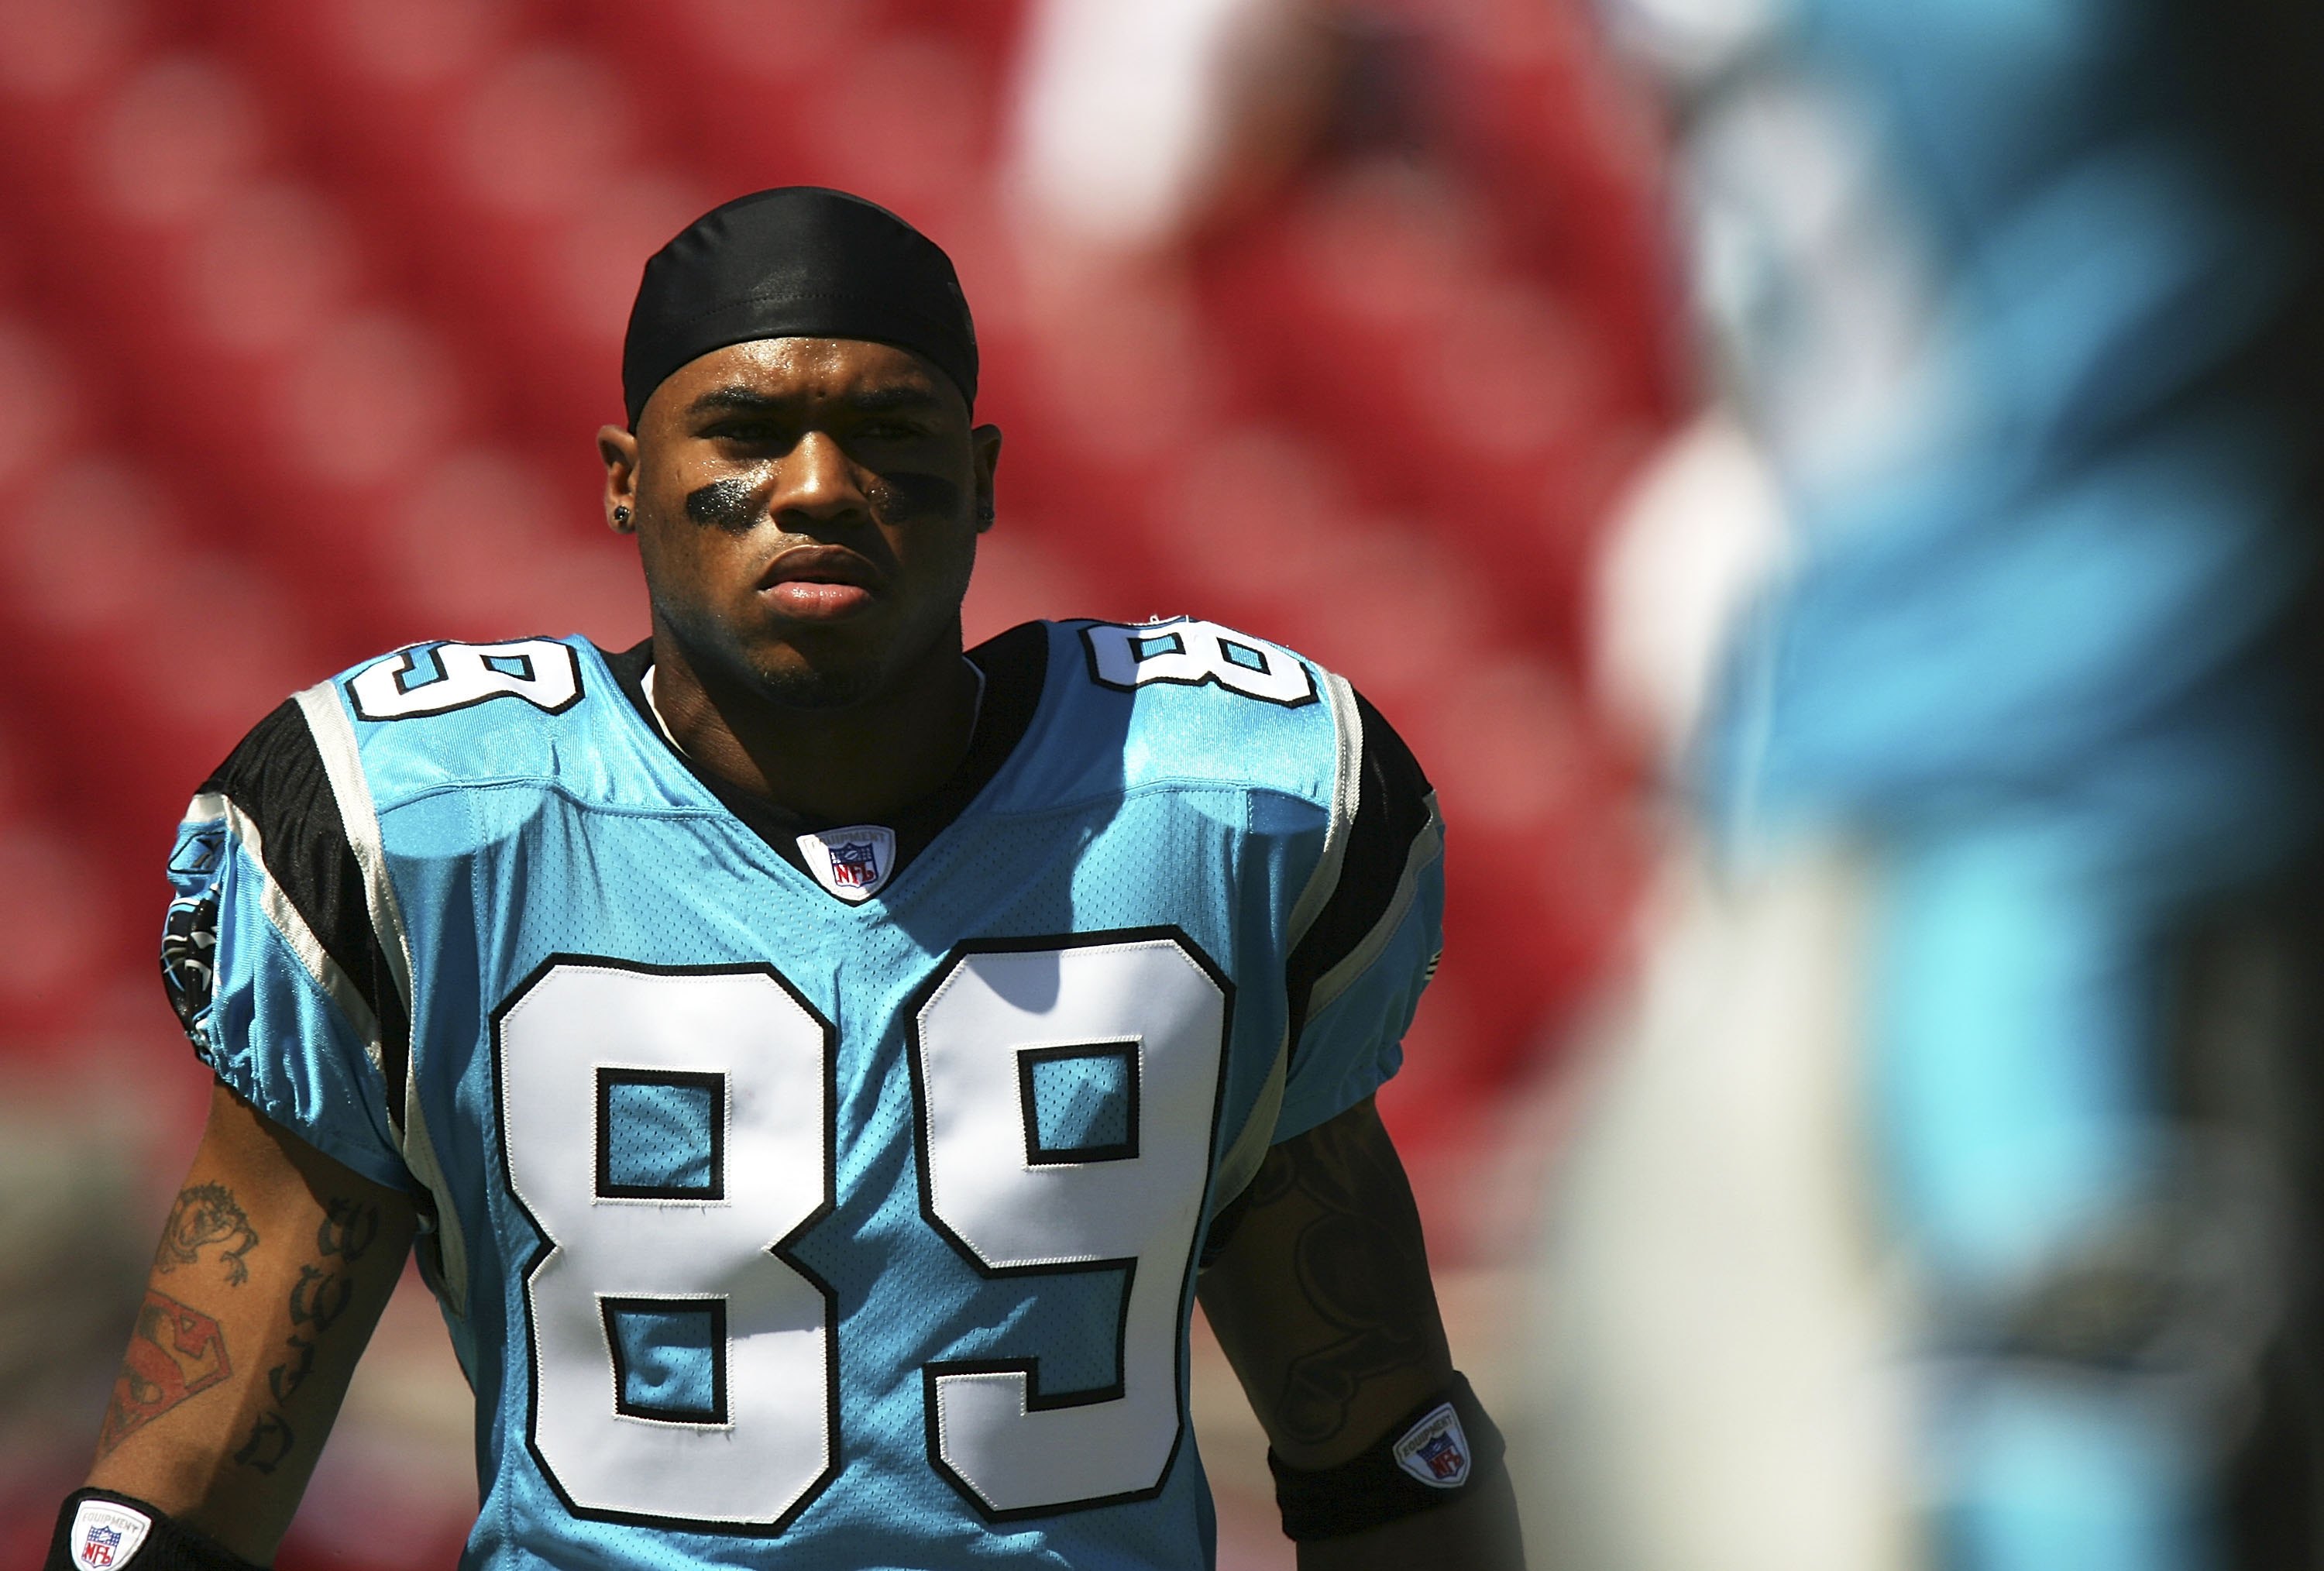 Panthers wideout Steve Smith Sr warming up before a game